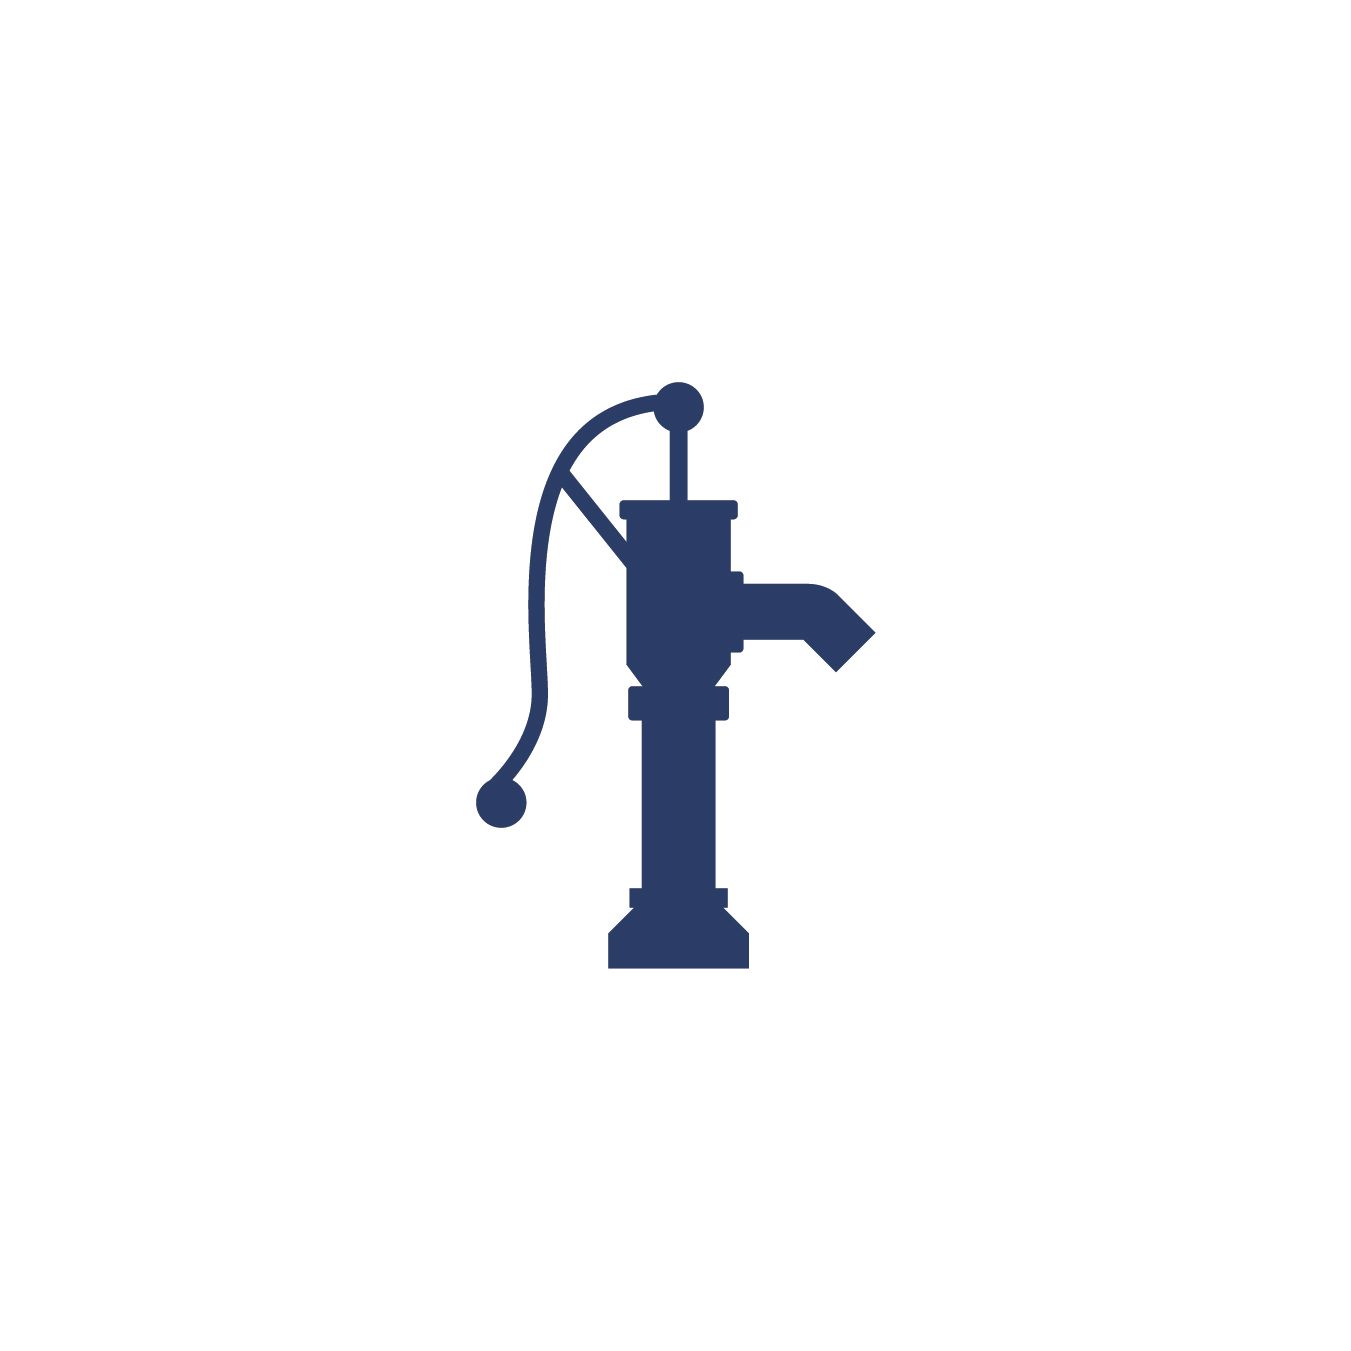 A blue silhouette of a water pump on a white background.